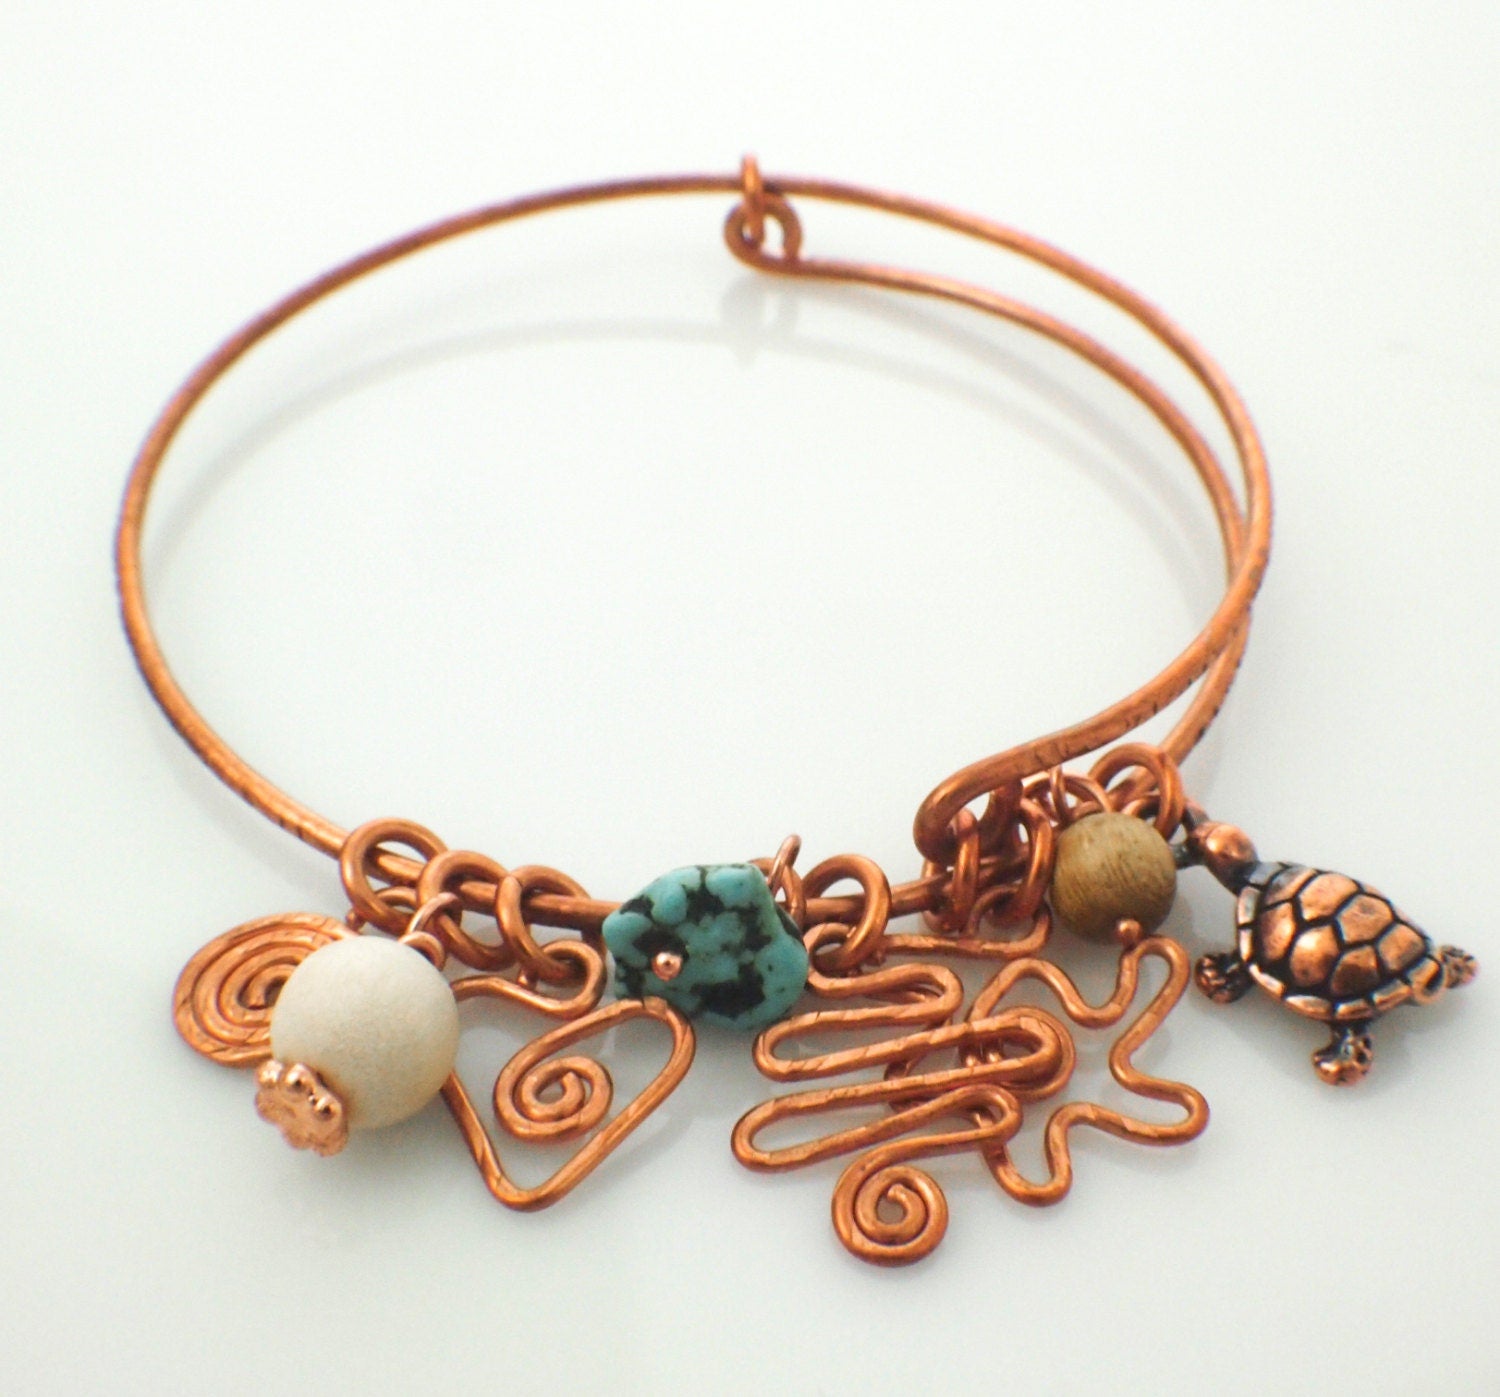 How to Make Wire Jewelry the Right Way: Wire Bracelets